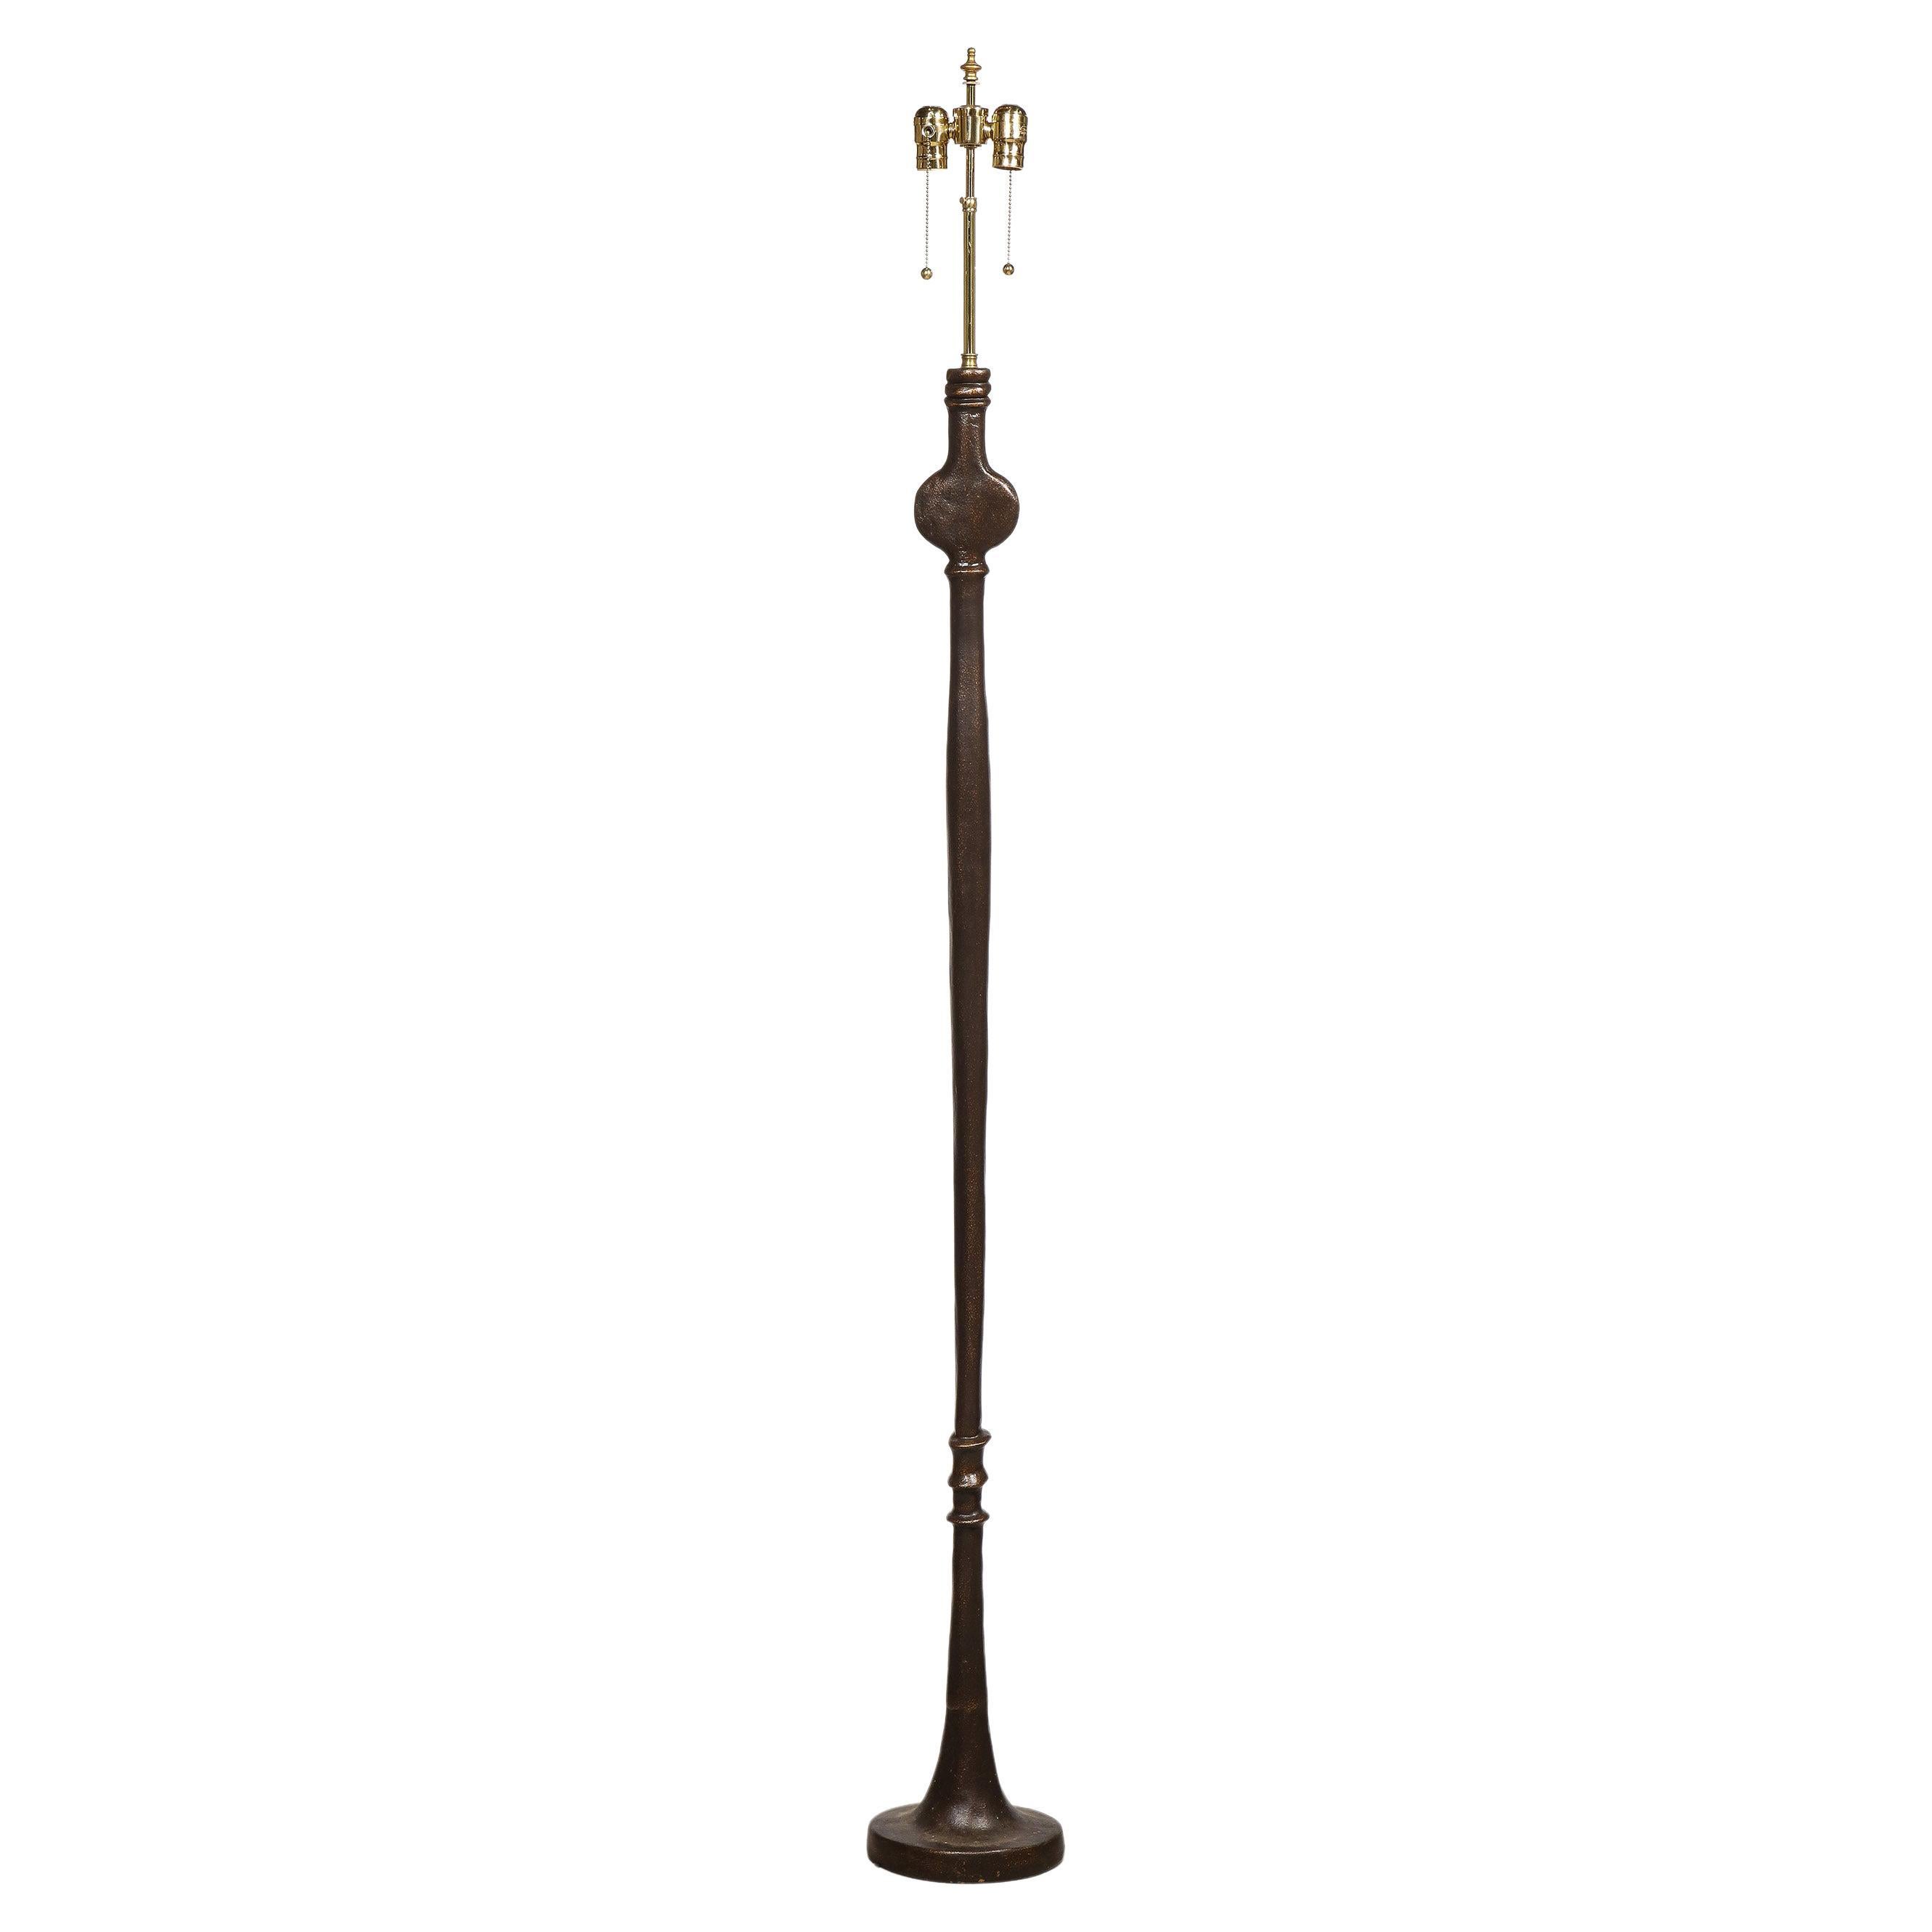 Giacometti Style Resin Floor Lamp - TO BE GILDED